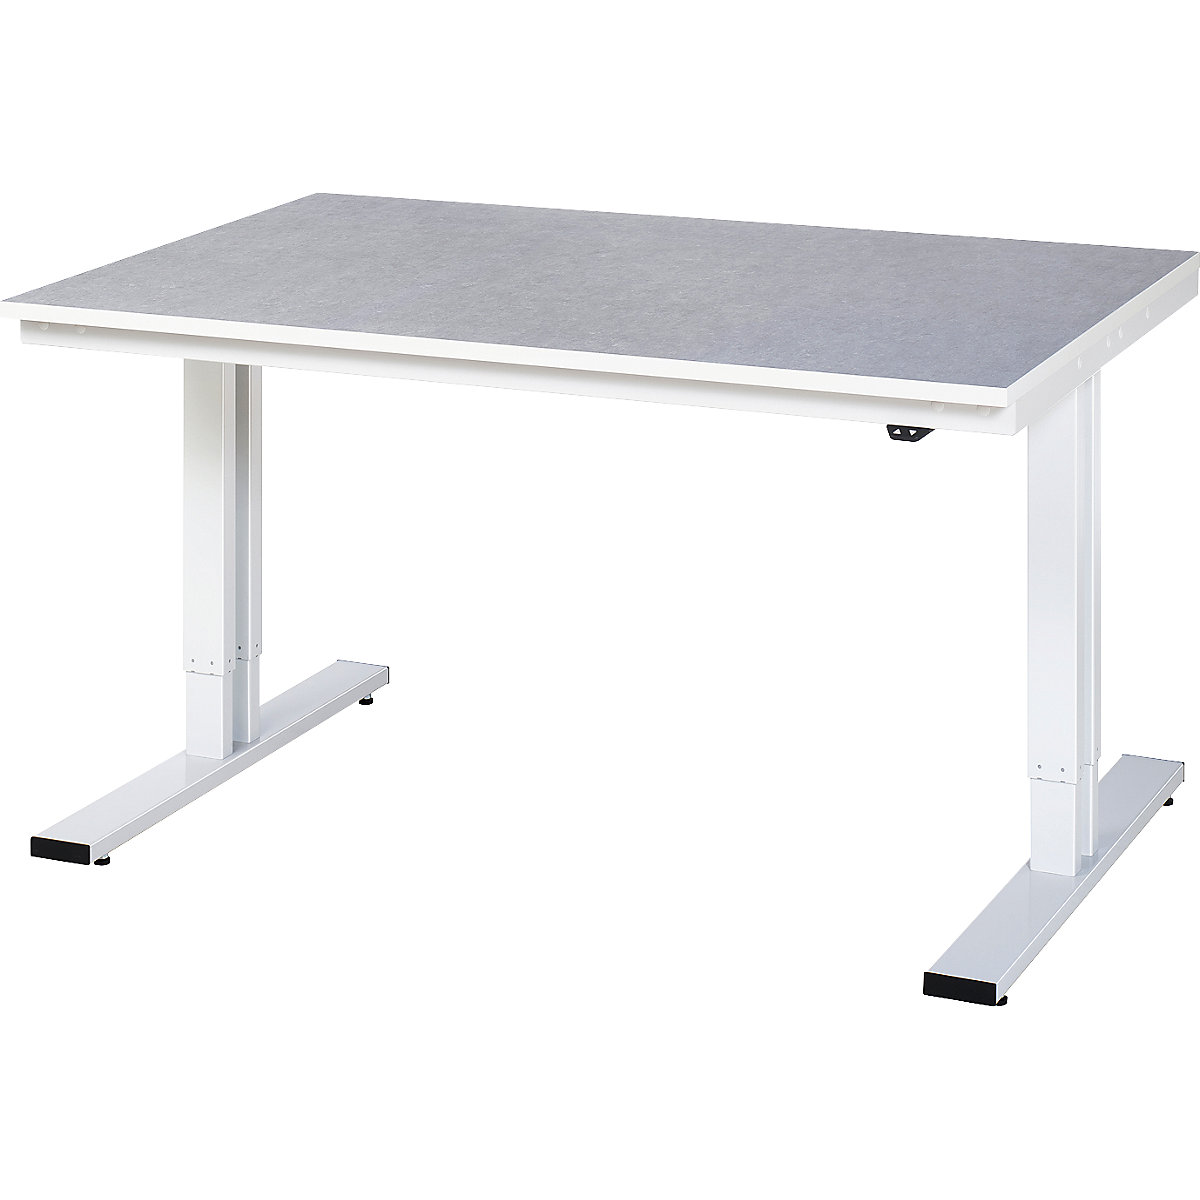 Work table, electric height adjustment – RAU, linoleum cover, max. load 300 kg, WxD 1500 x 1000 mm-6